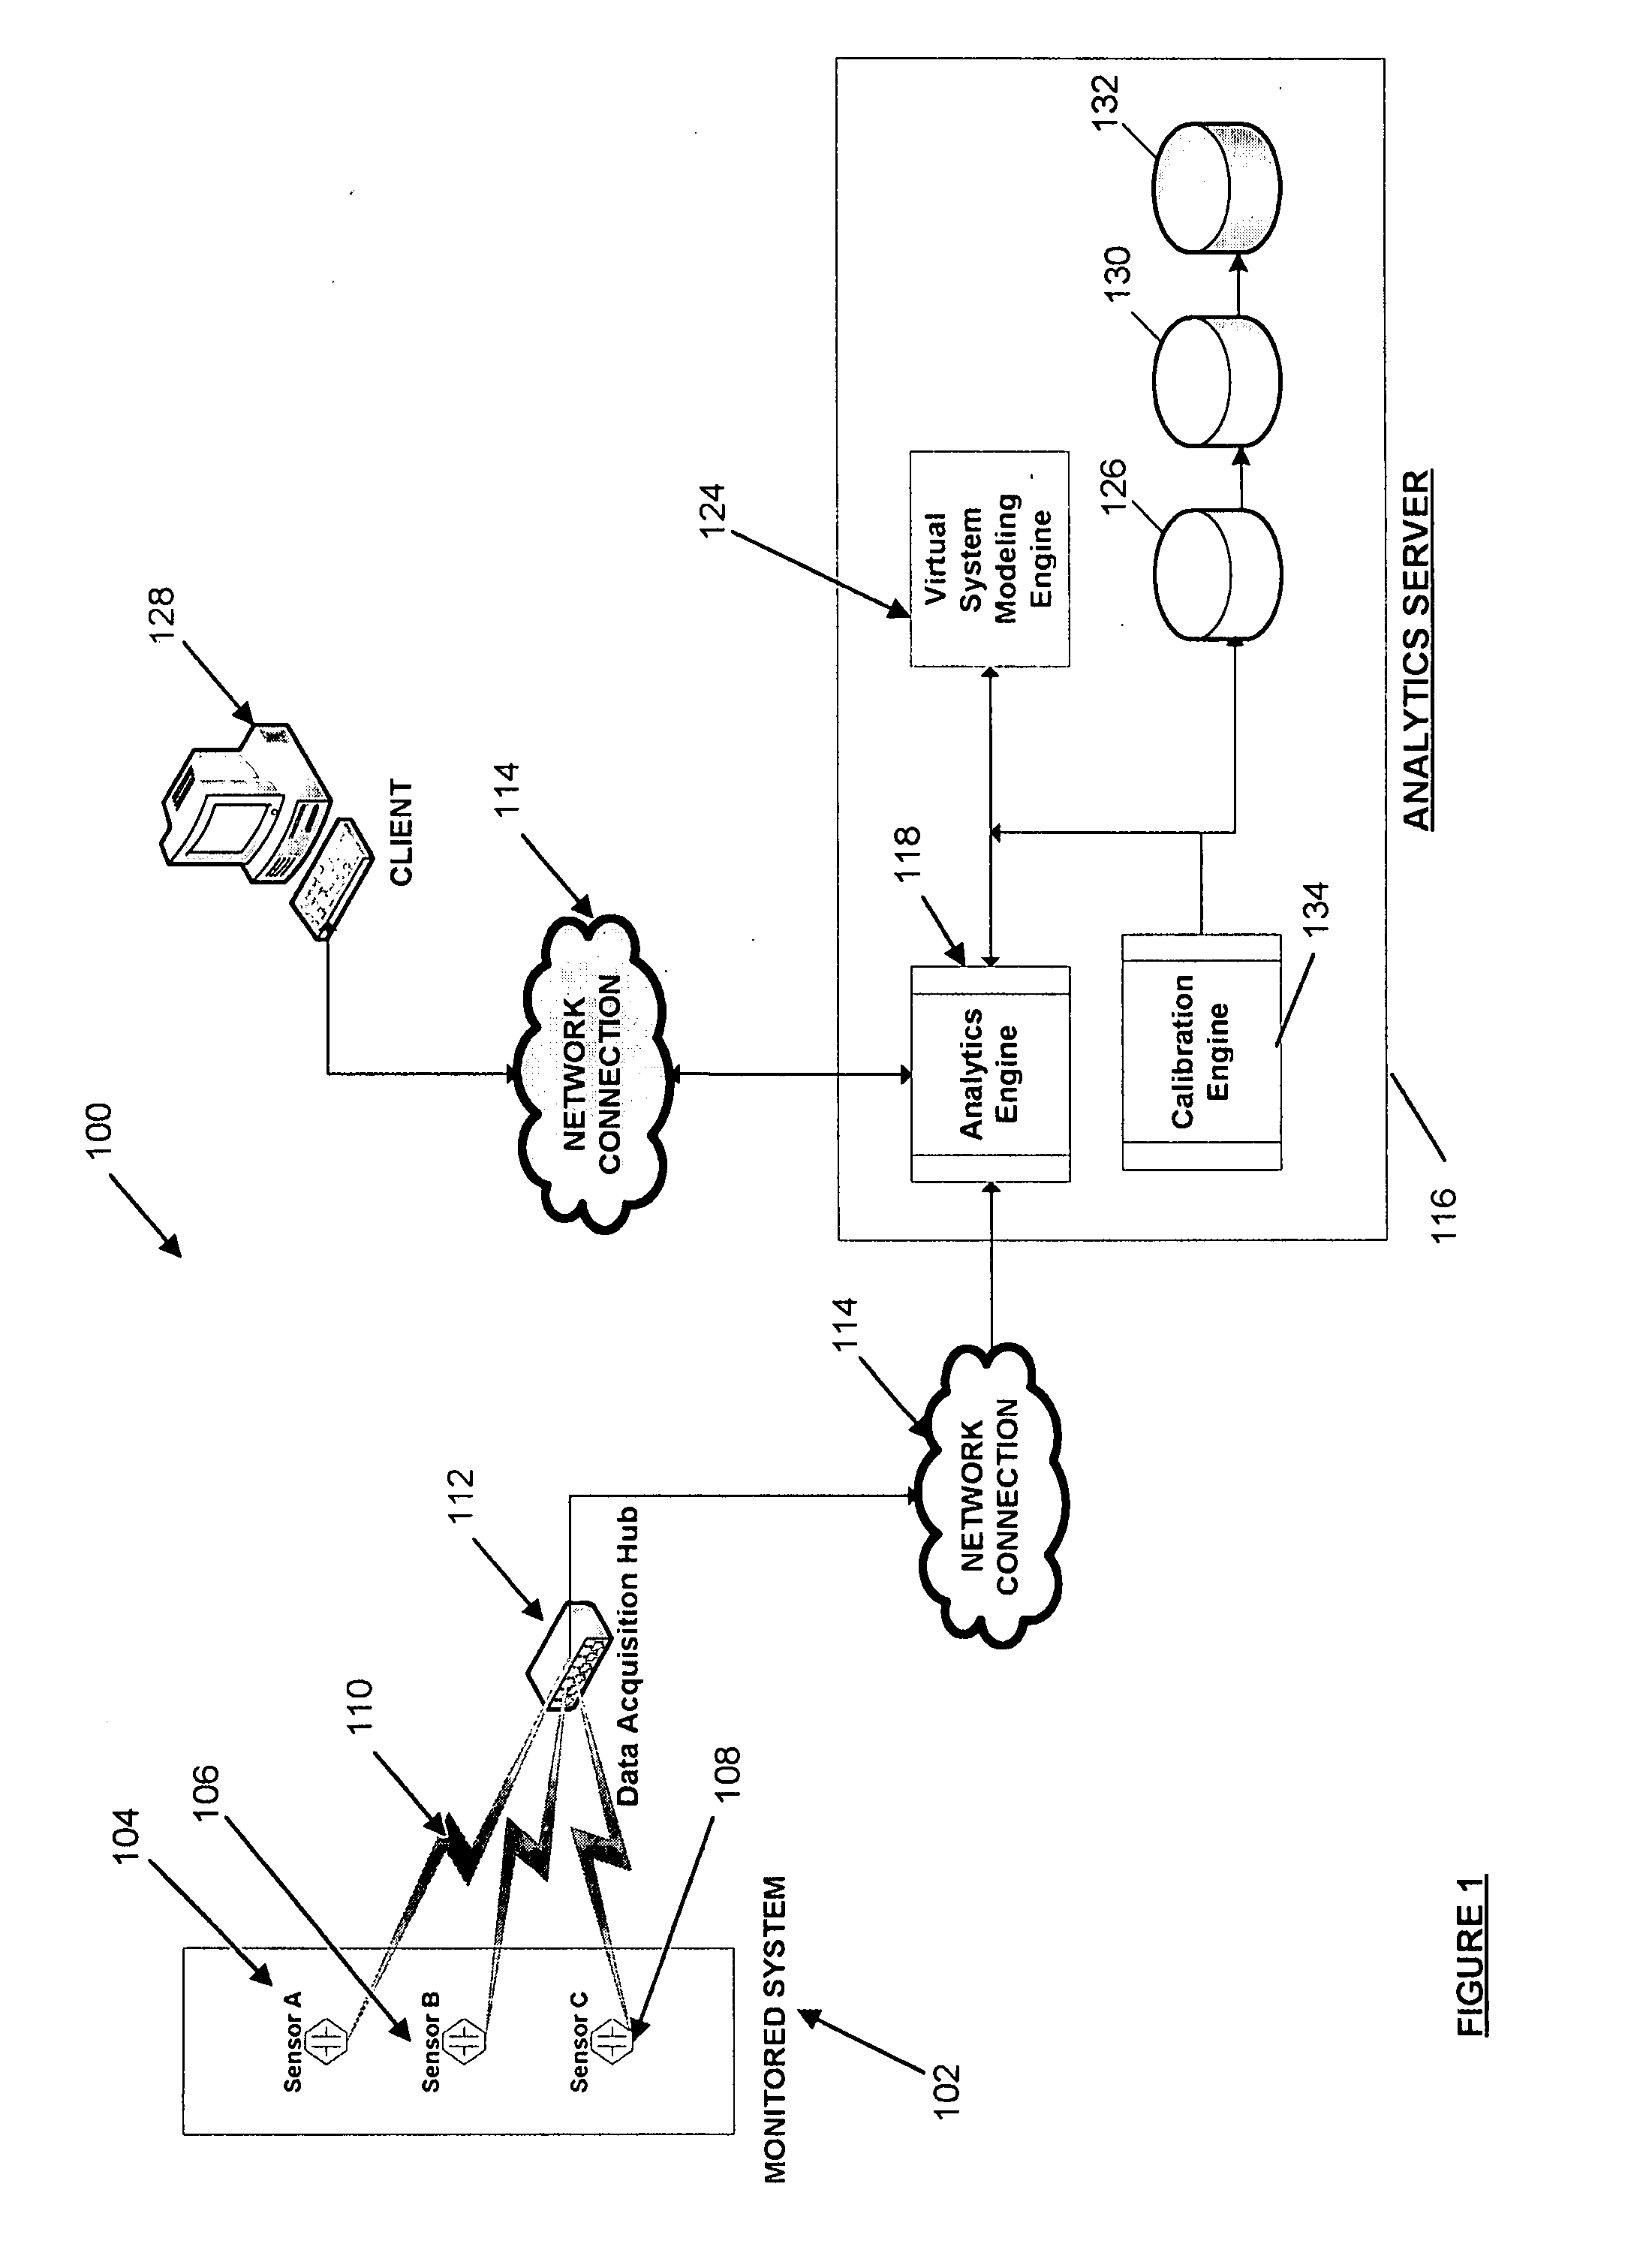 Systems and methods for predictive monitoring including real-time strength and security analysis in an electrical power distribution system